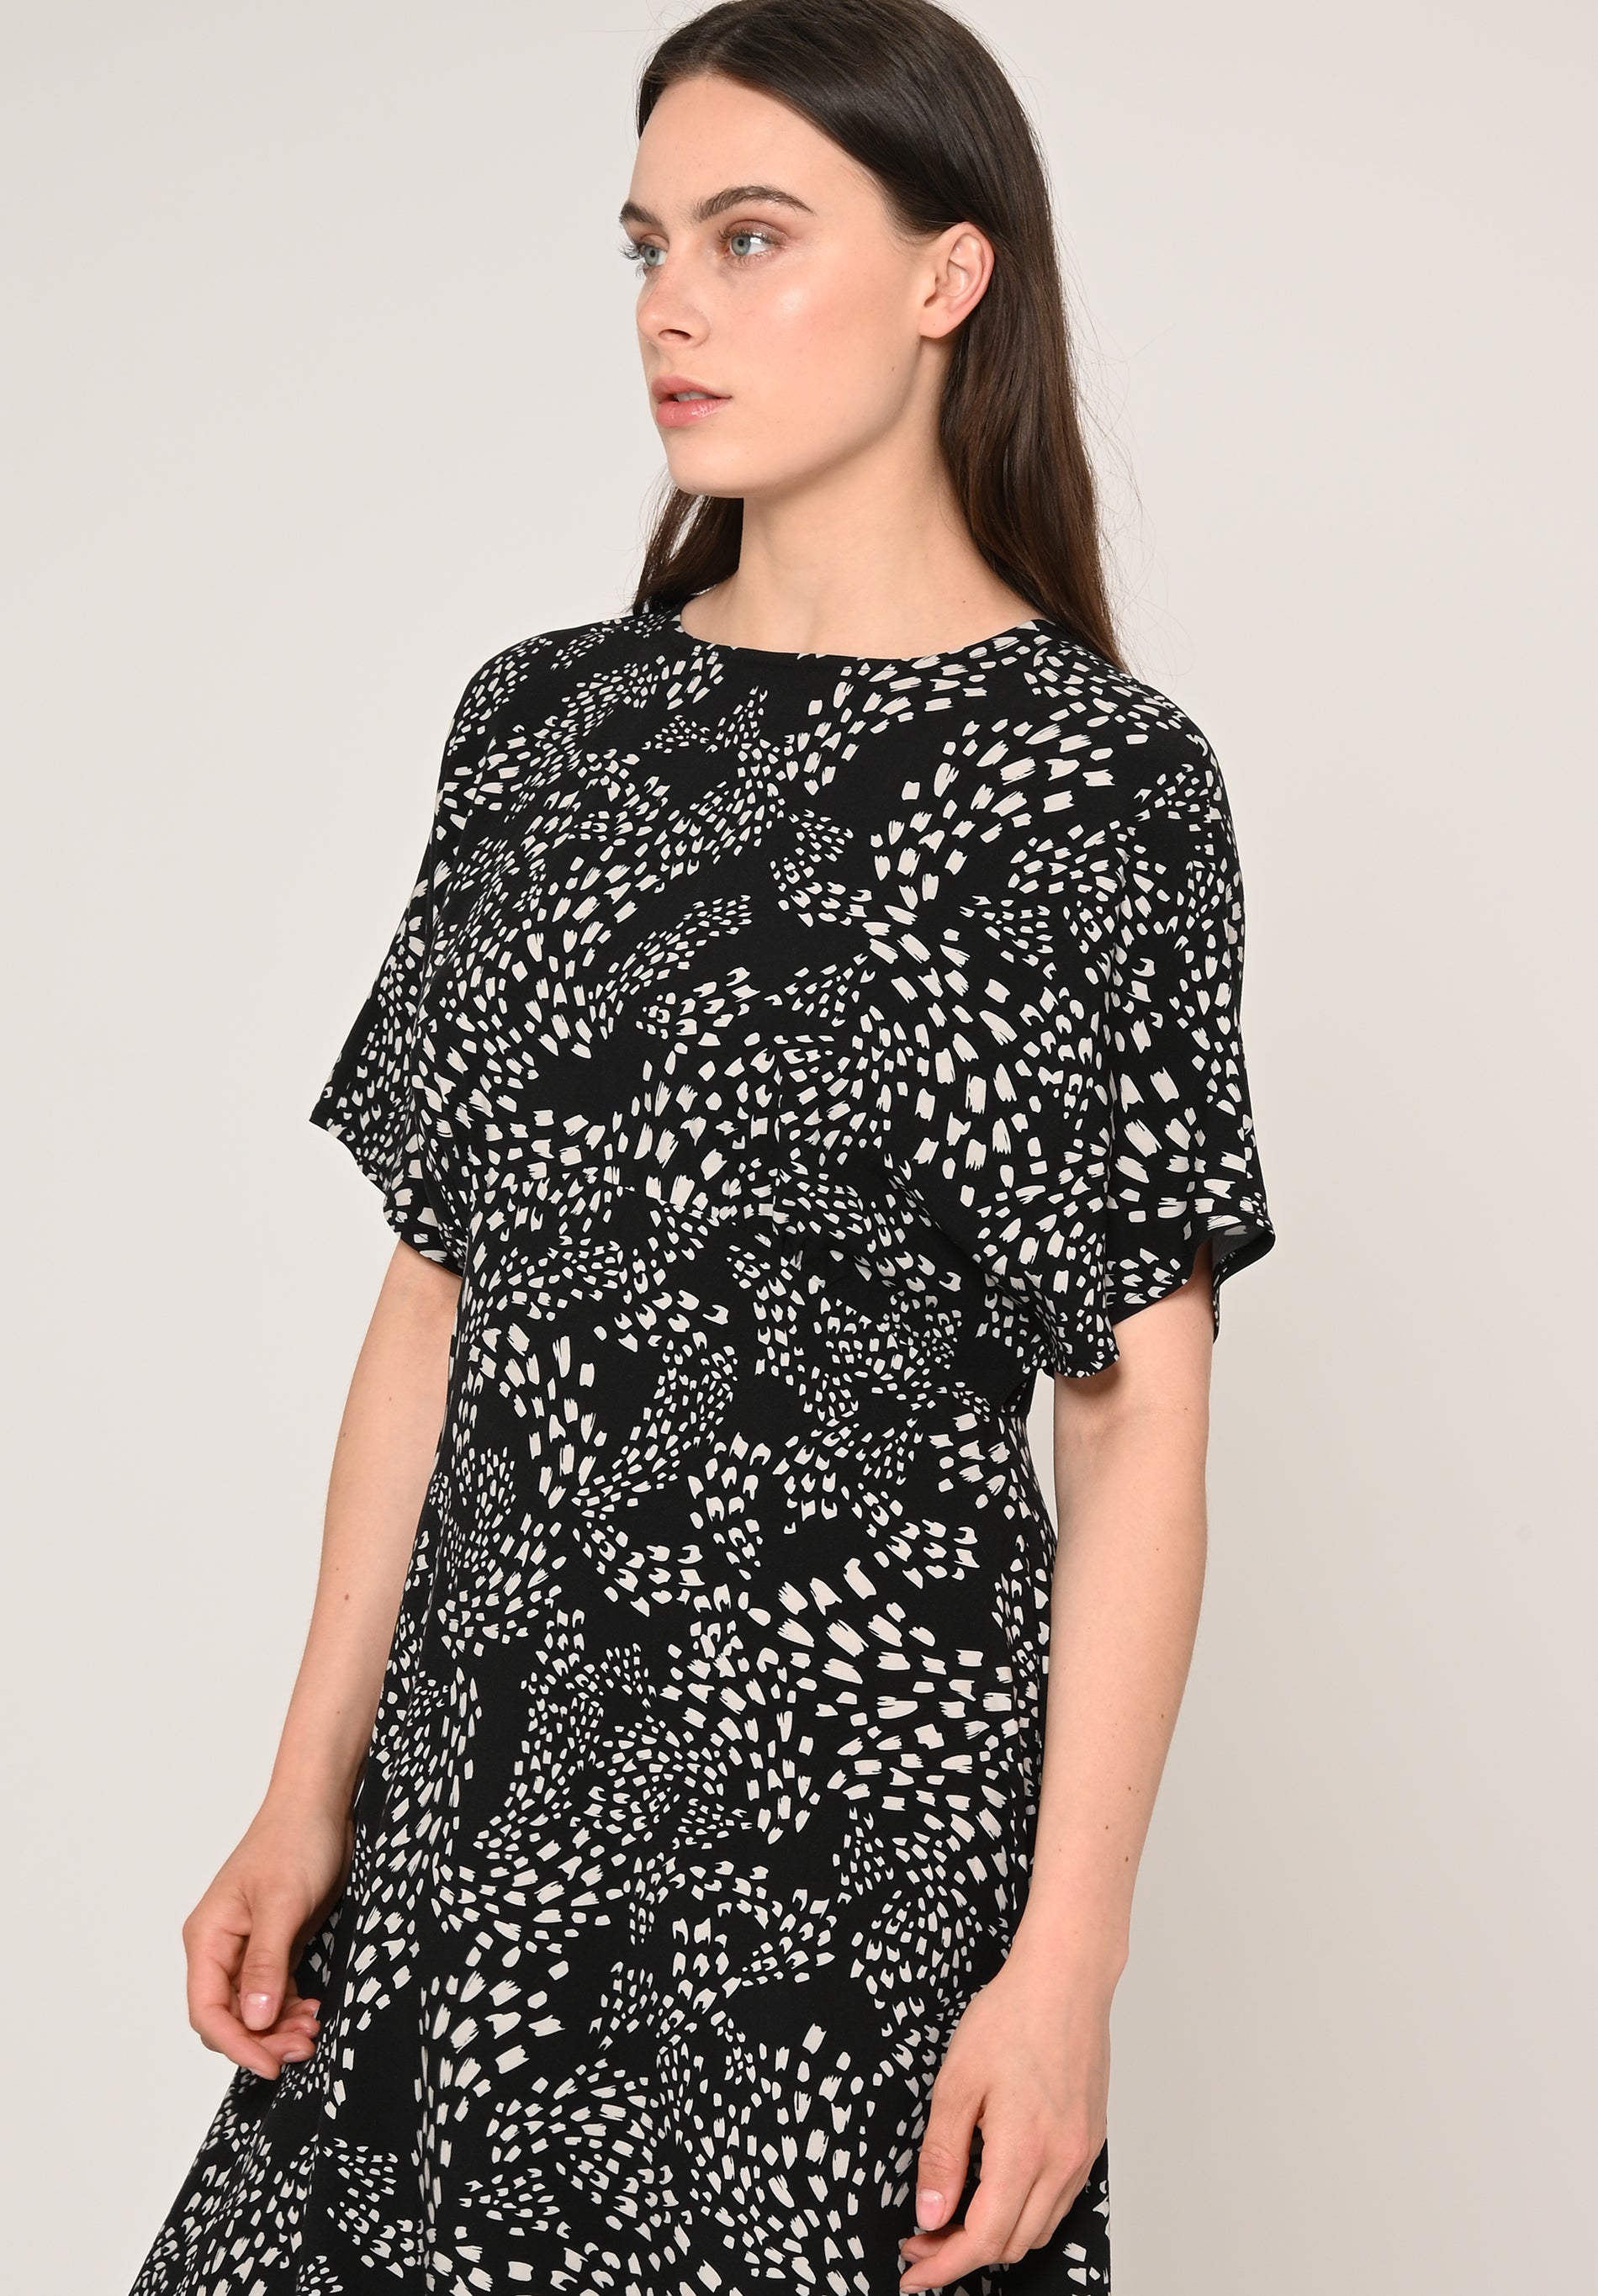 Maxi dress ODON in black and white pattern by LOVJOI made from ECOVERO™